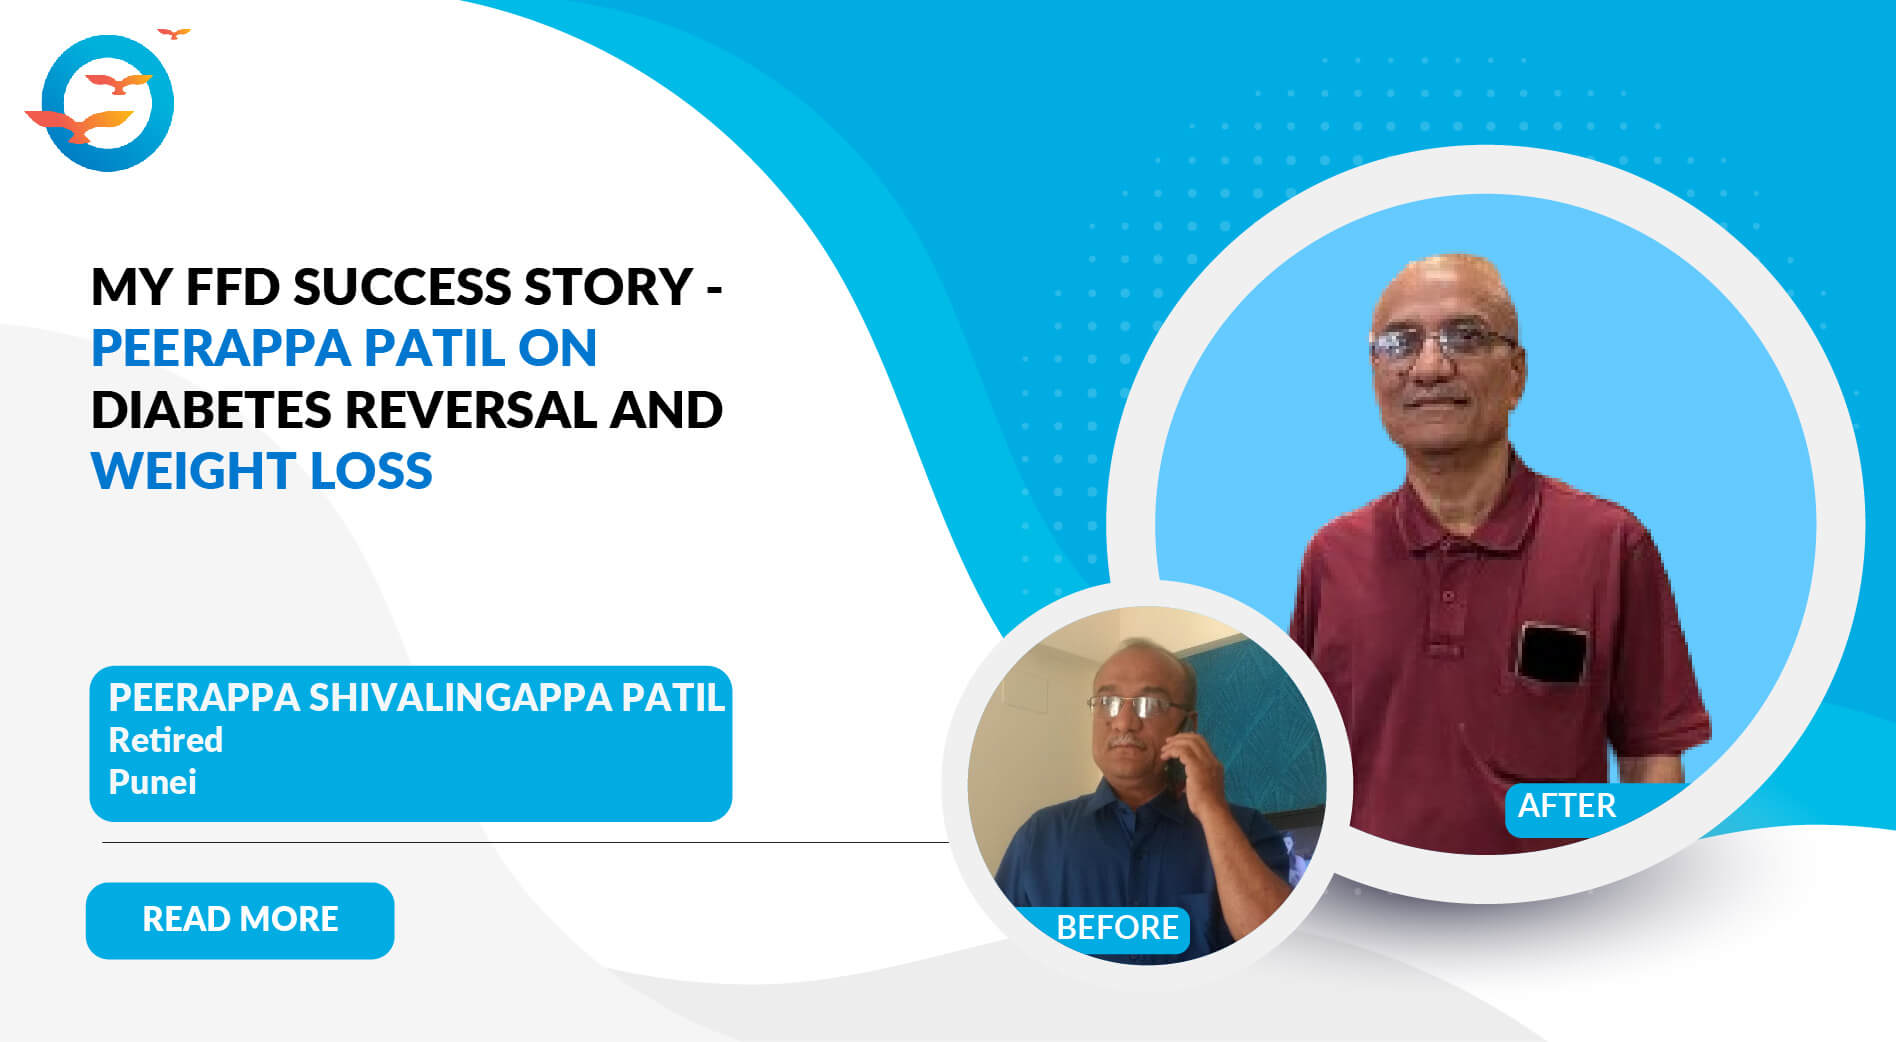 How FFD Helped Me Stop Medications and Lose Weight - Peerappa Patil